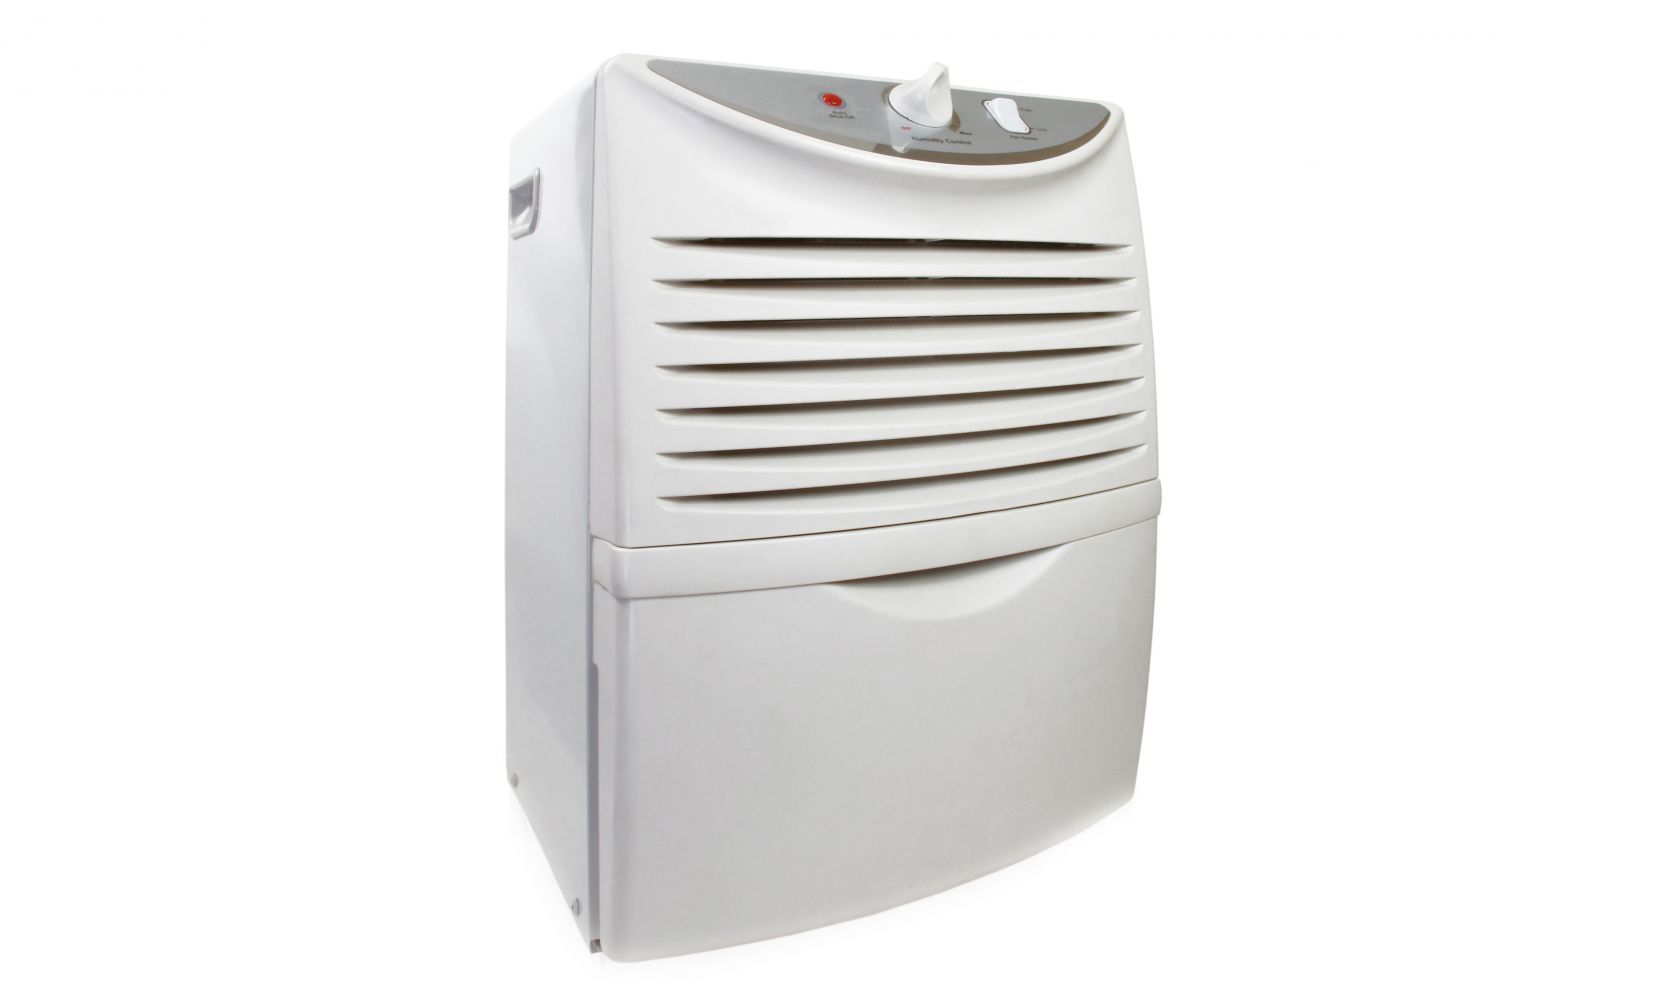 Used appliances such as air humidifier in Anchorage, AK